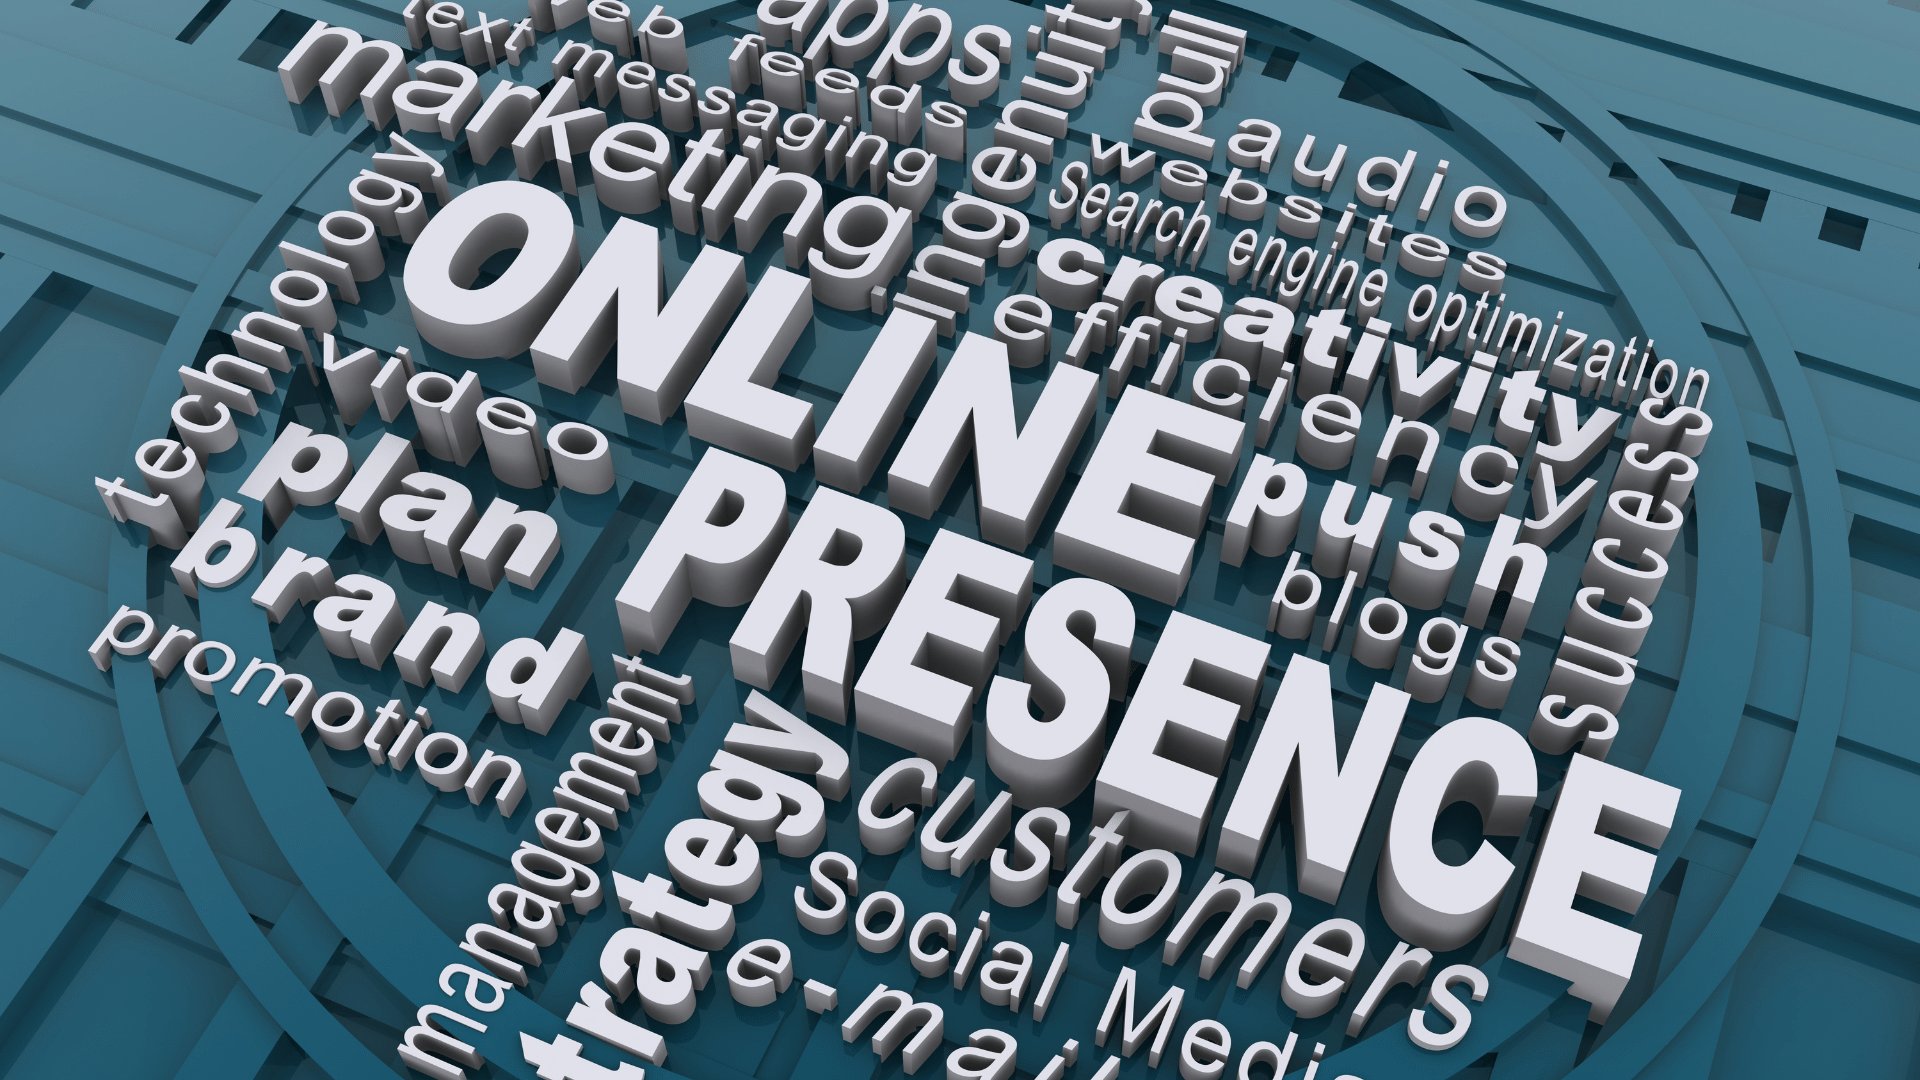 Your Online Presence